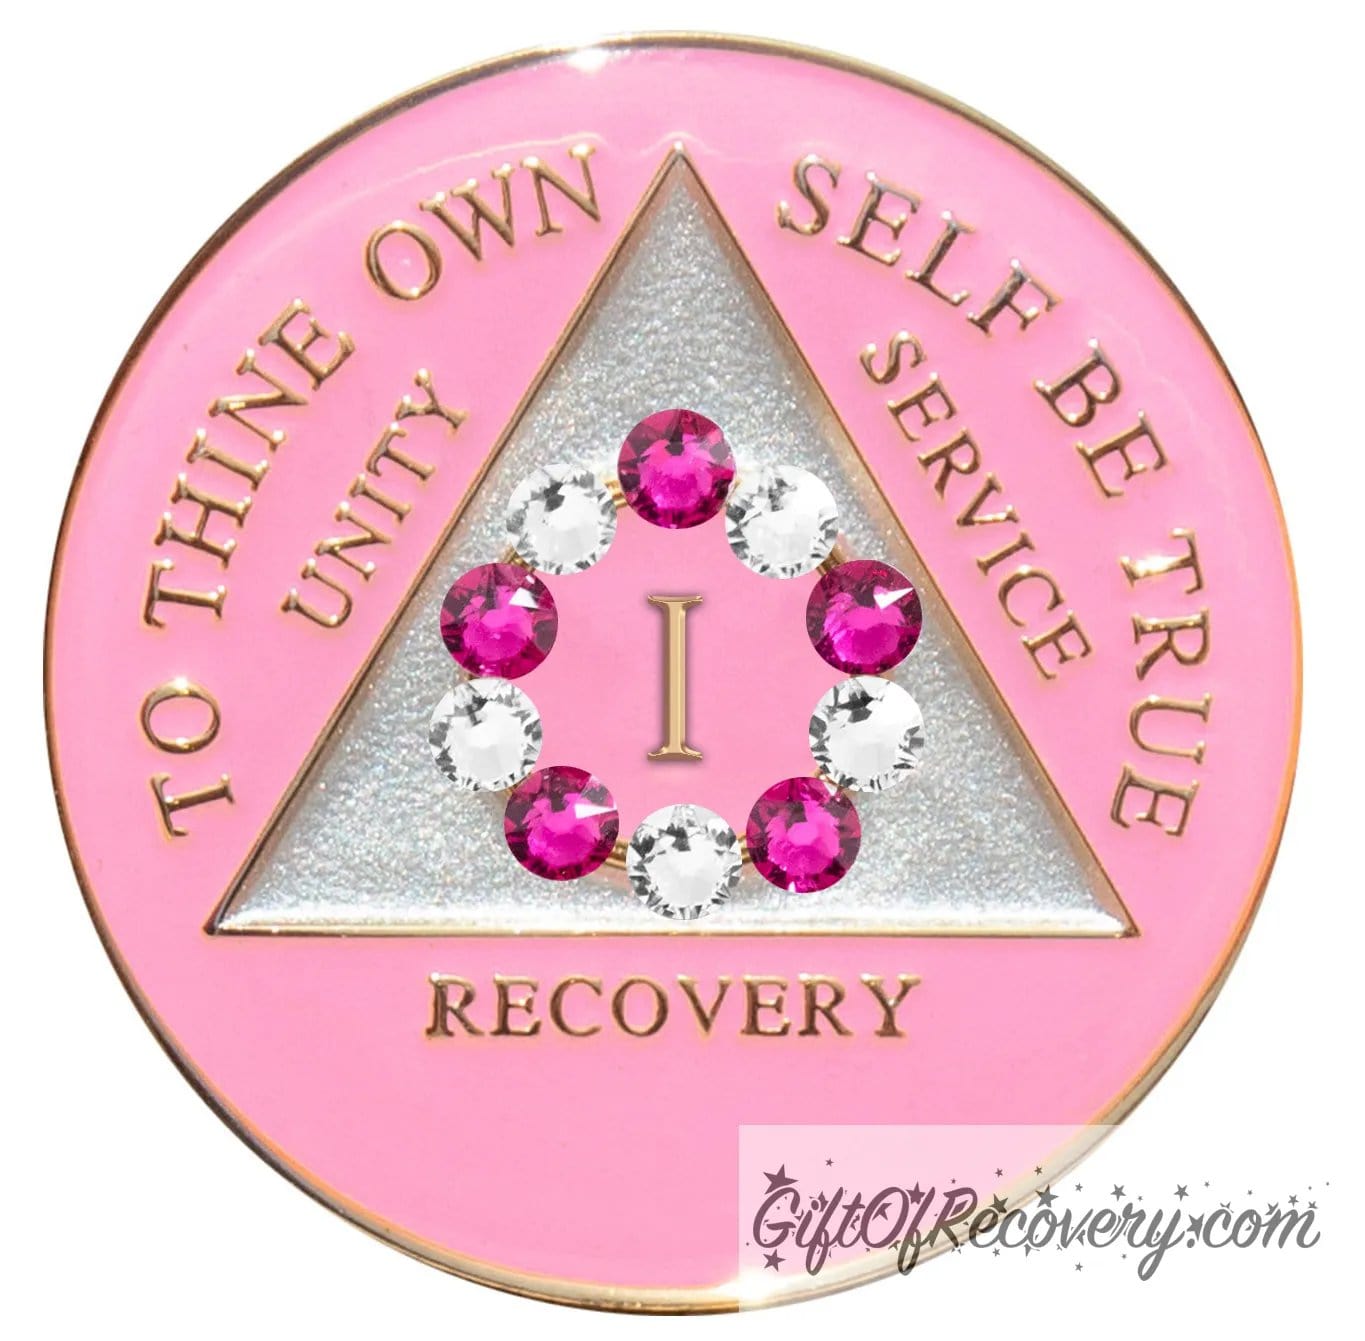 1 year princess pink AA medallion with a pearl white triangle center and pink circle, surrounding the roman numeral 1 are 10 genuine crystals, 5 dark pink and 5 clear, perfect for your favorite sober princess, to thine own self be true, unity, service, recovery, the rim of the medallion, the raised triangle outline, and the roman numeral year, are in 14k gold, sealed with resin for a glossy finish.